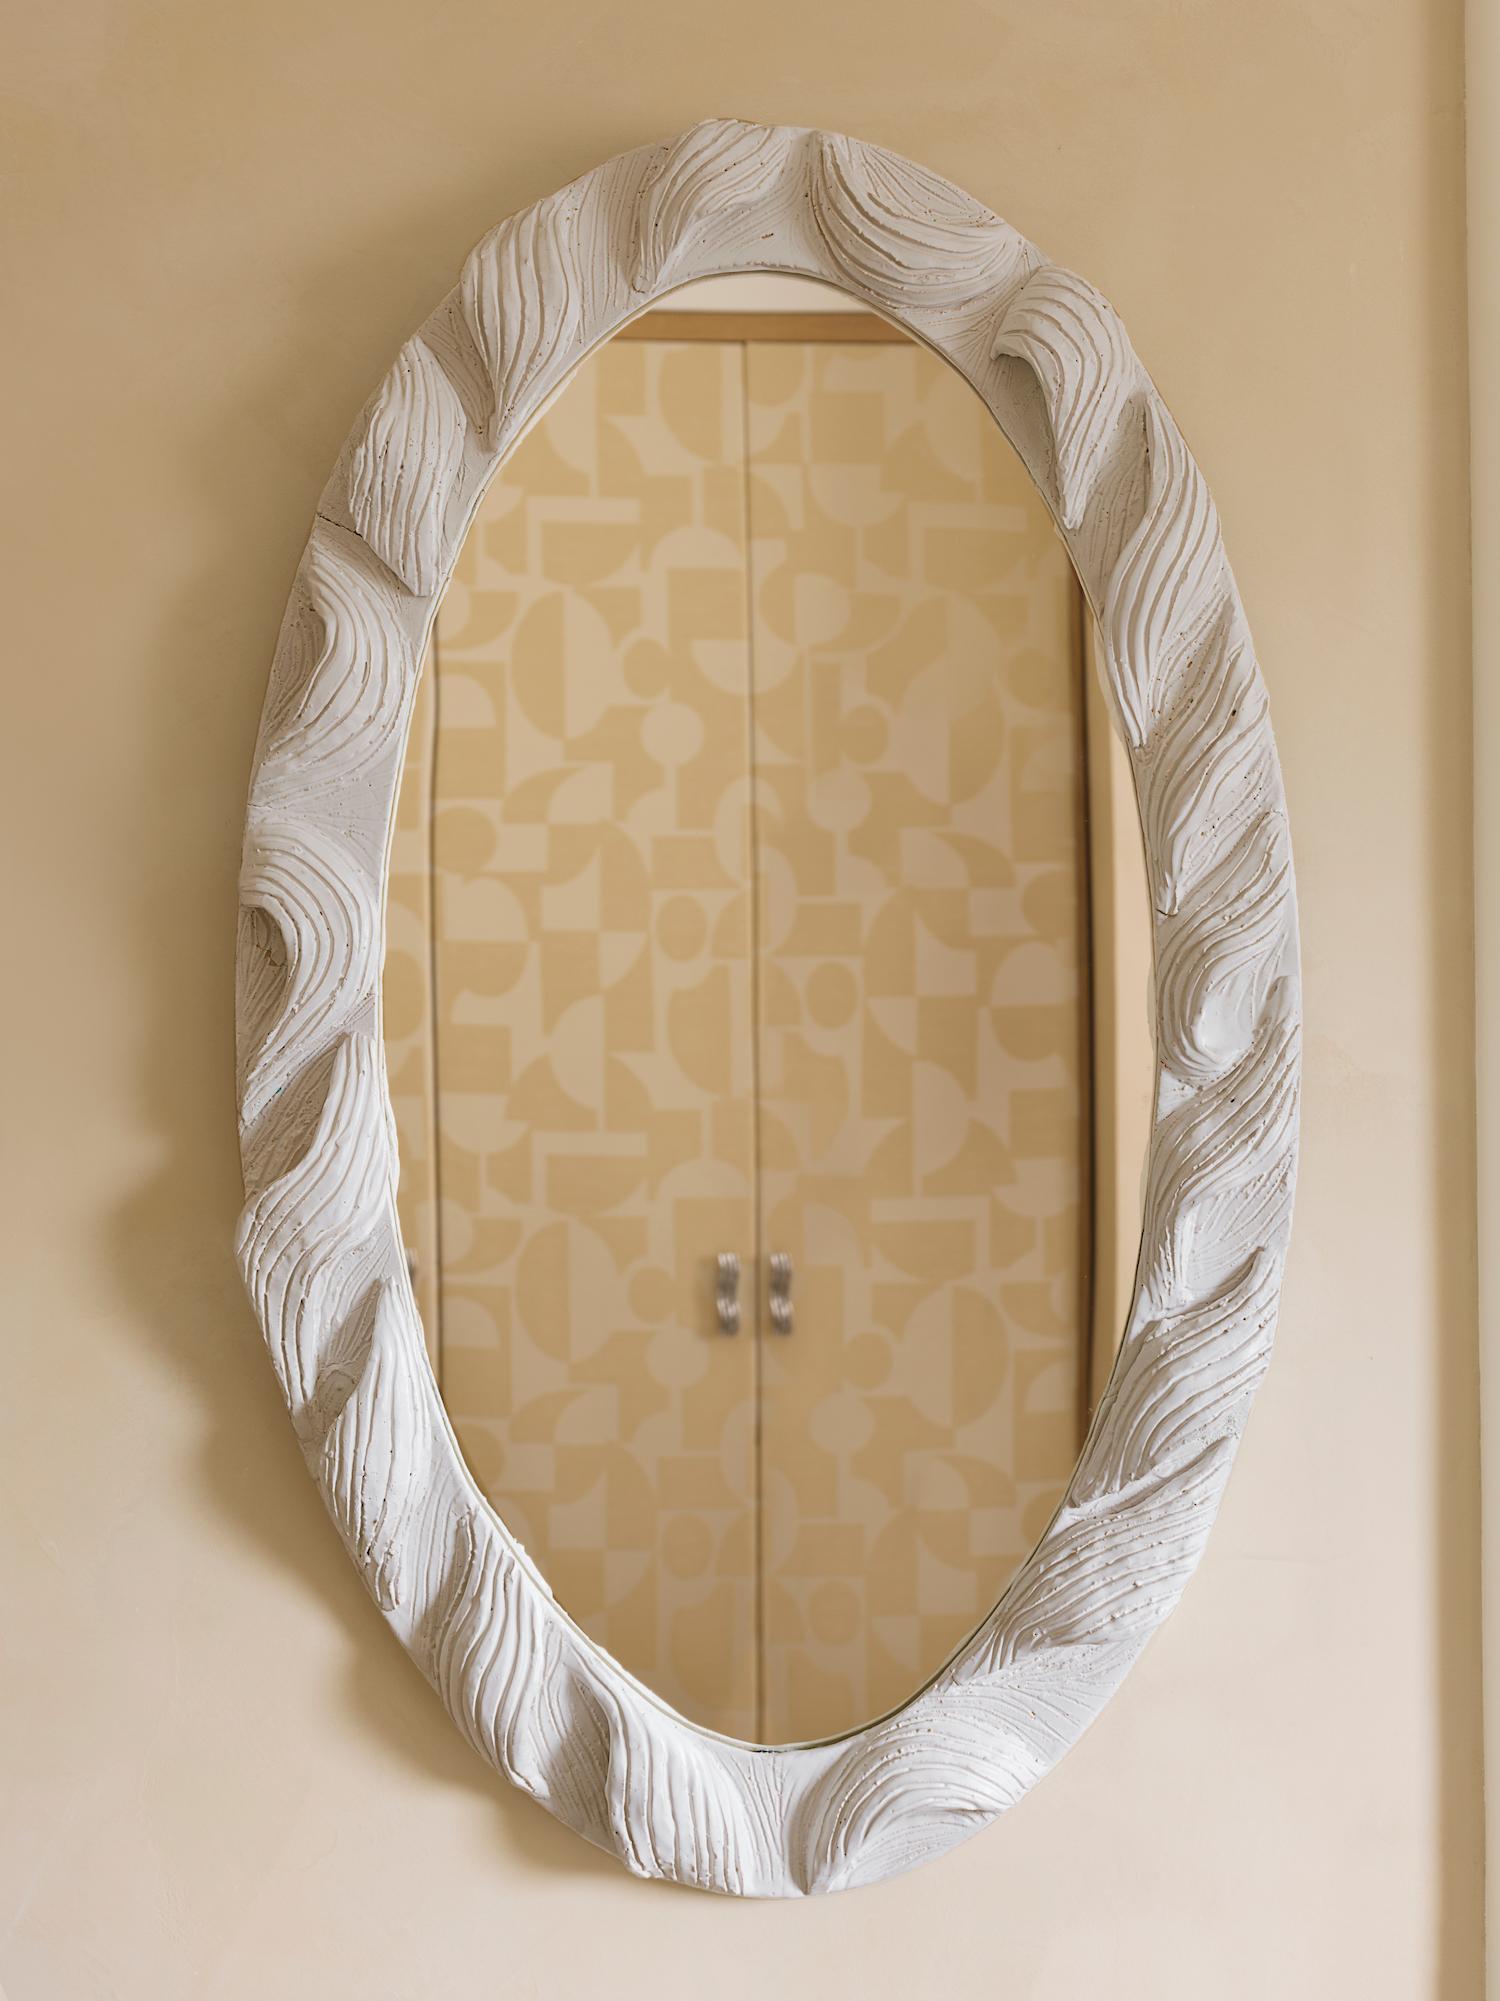 Other Tresse Mirror in Ceramic Designed by Laura Gonzalez For Sale